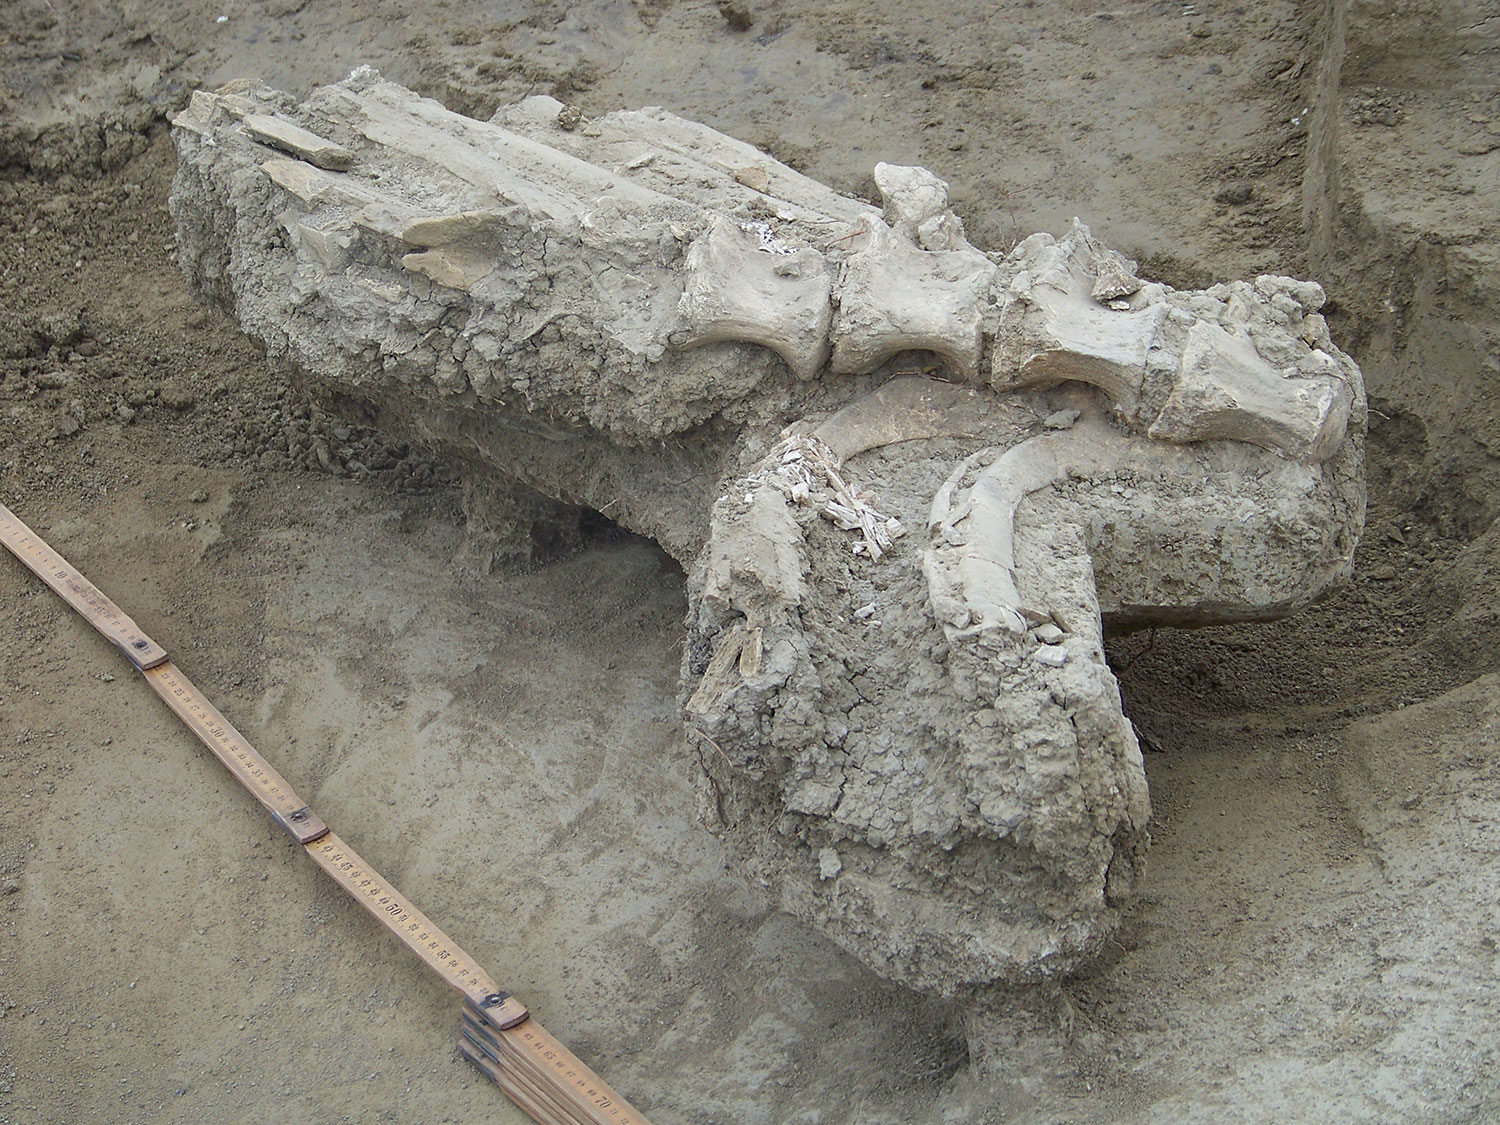 Mexico bison remains